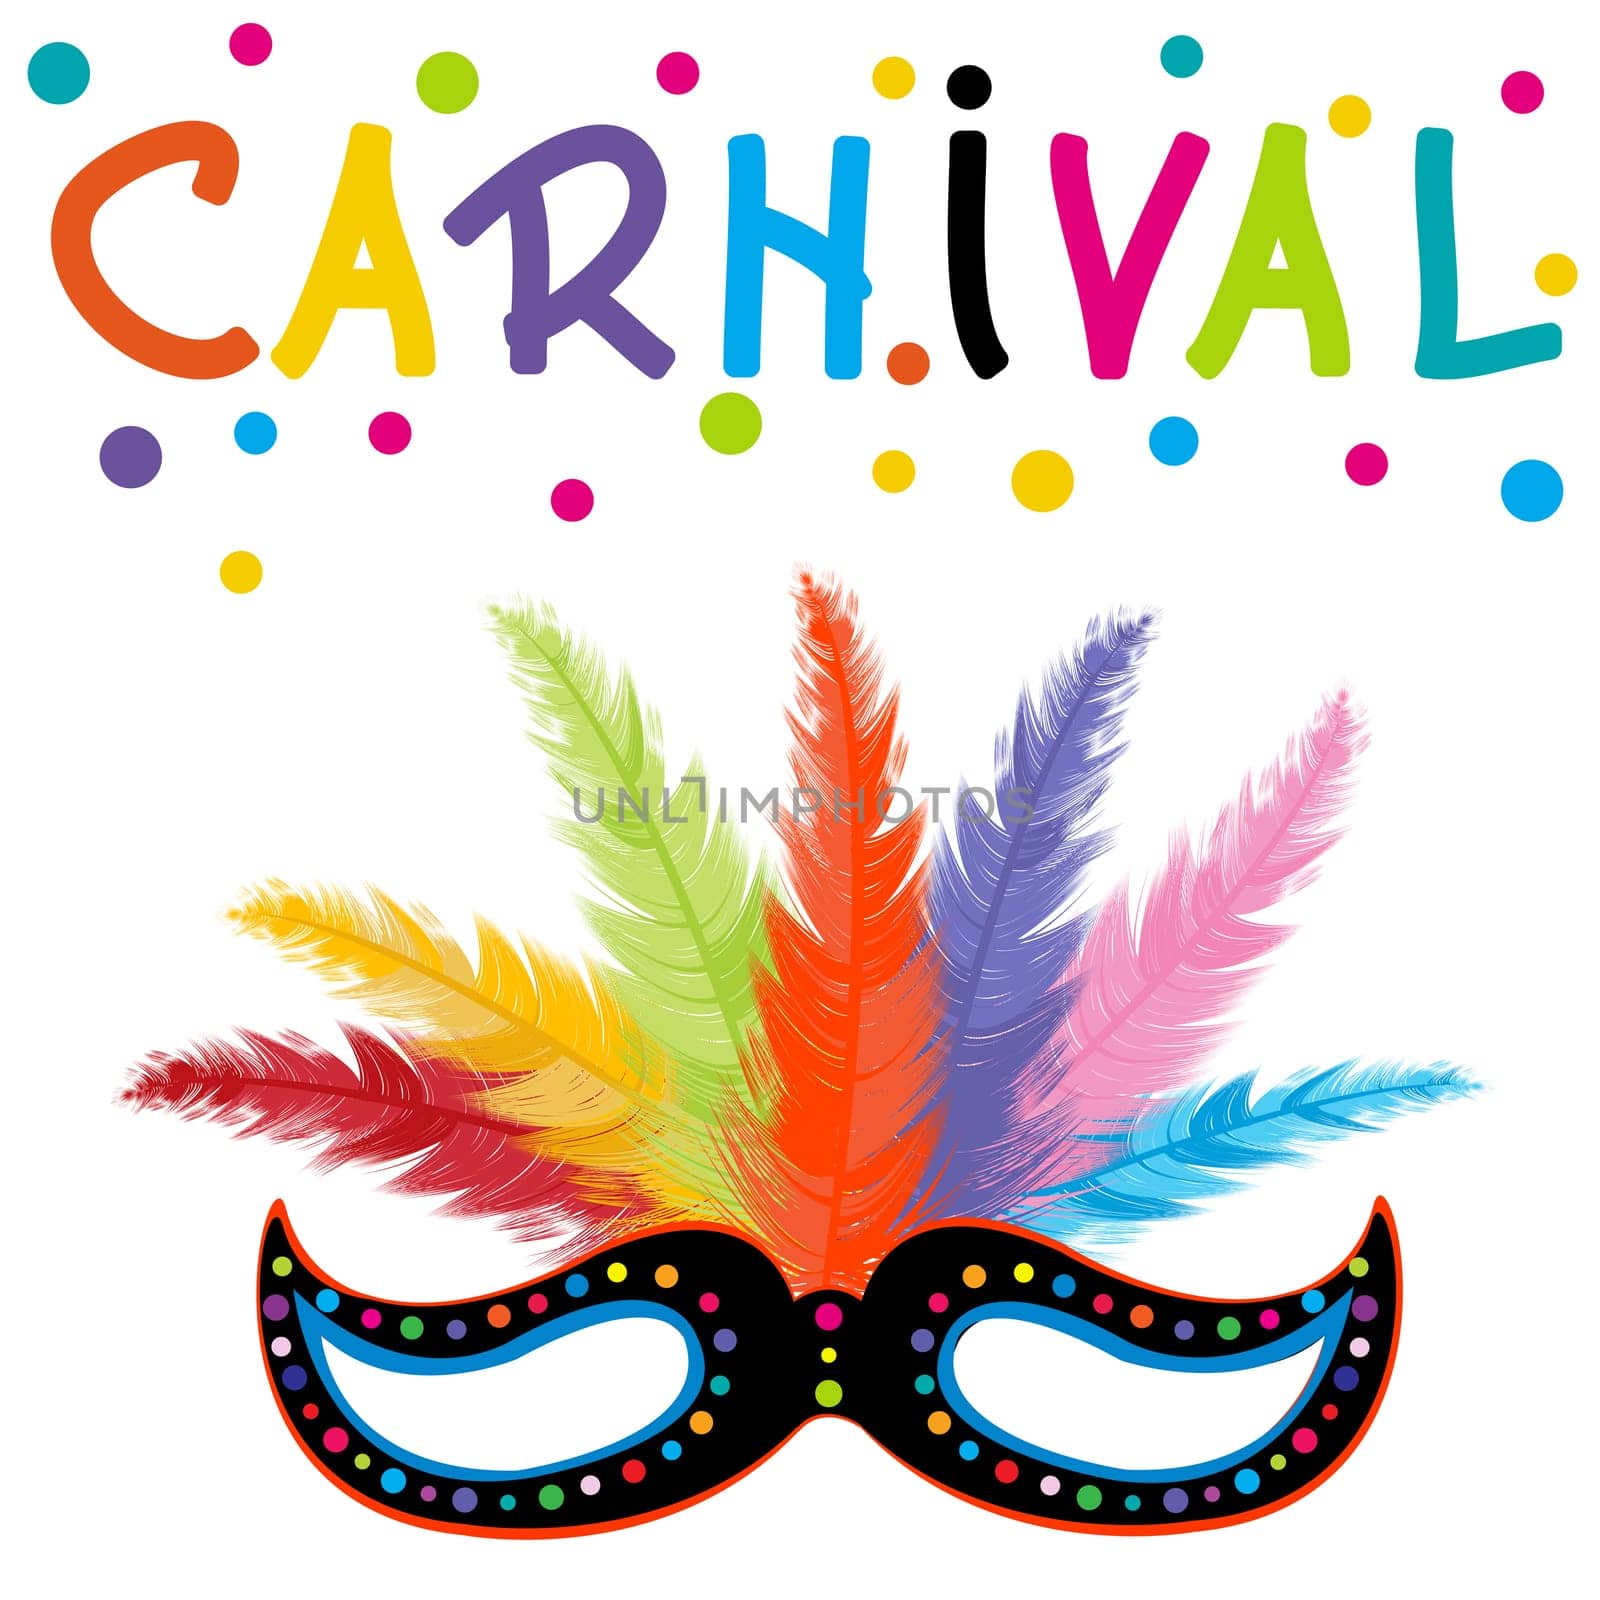 Carnival poster with a mask with colorful feathers by hibrida13